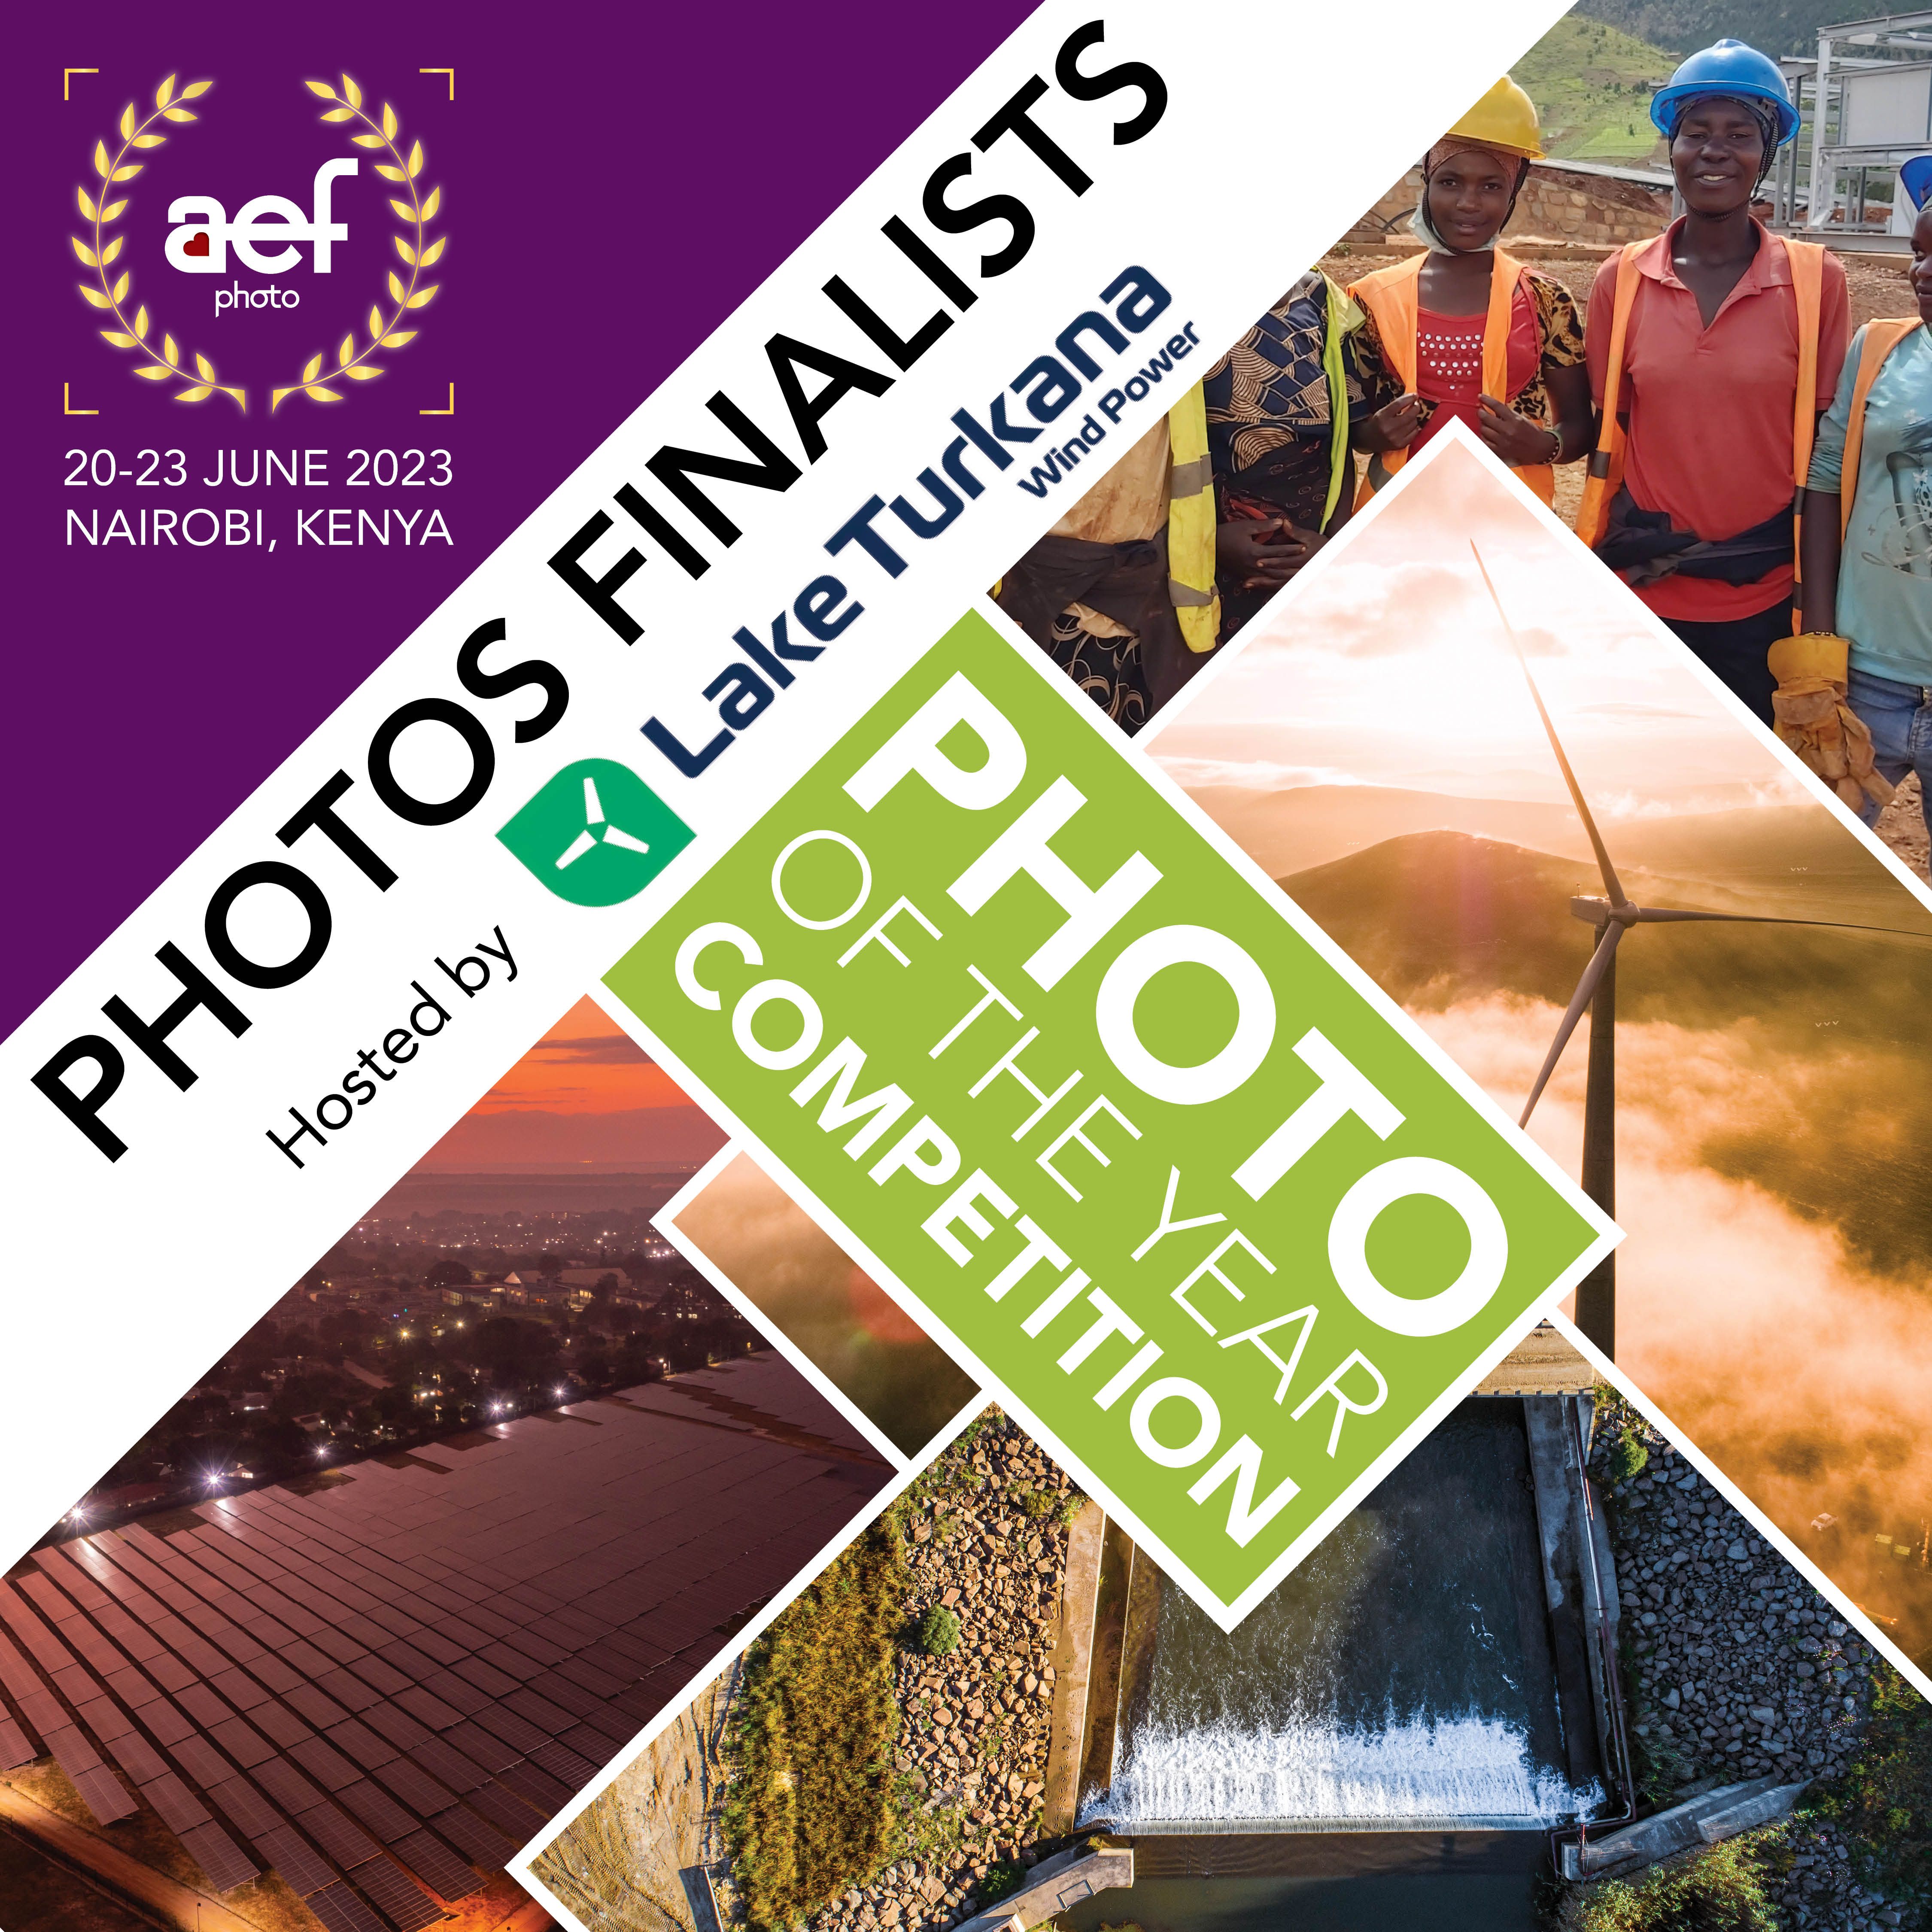 aef 2022 photo of the year competition winners announced